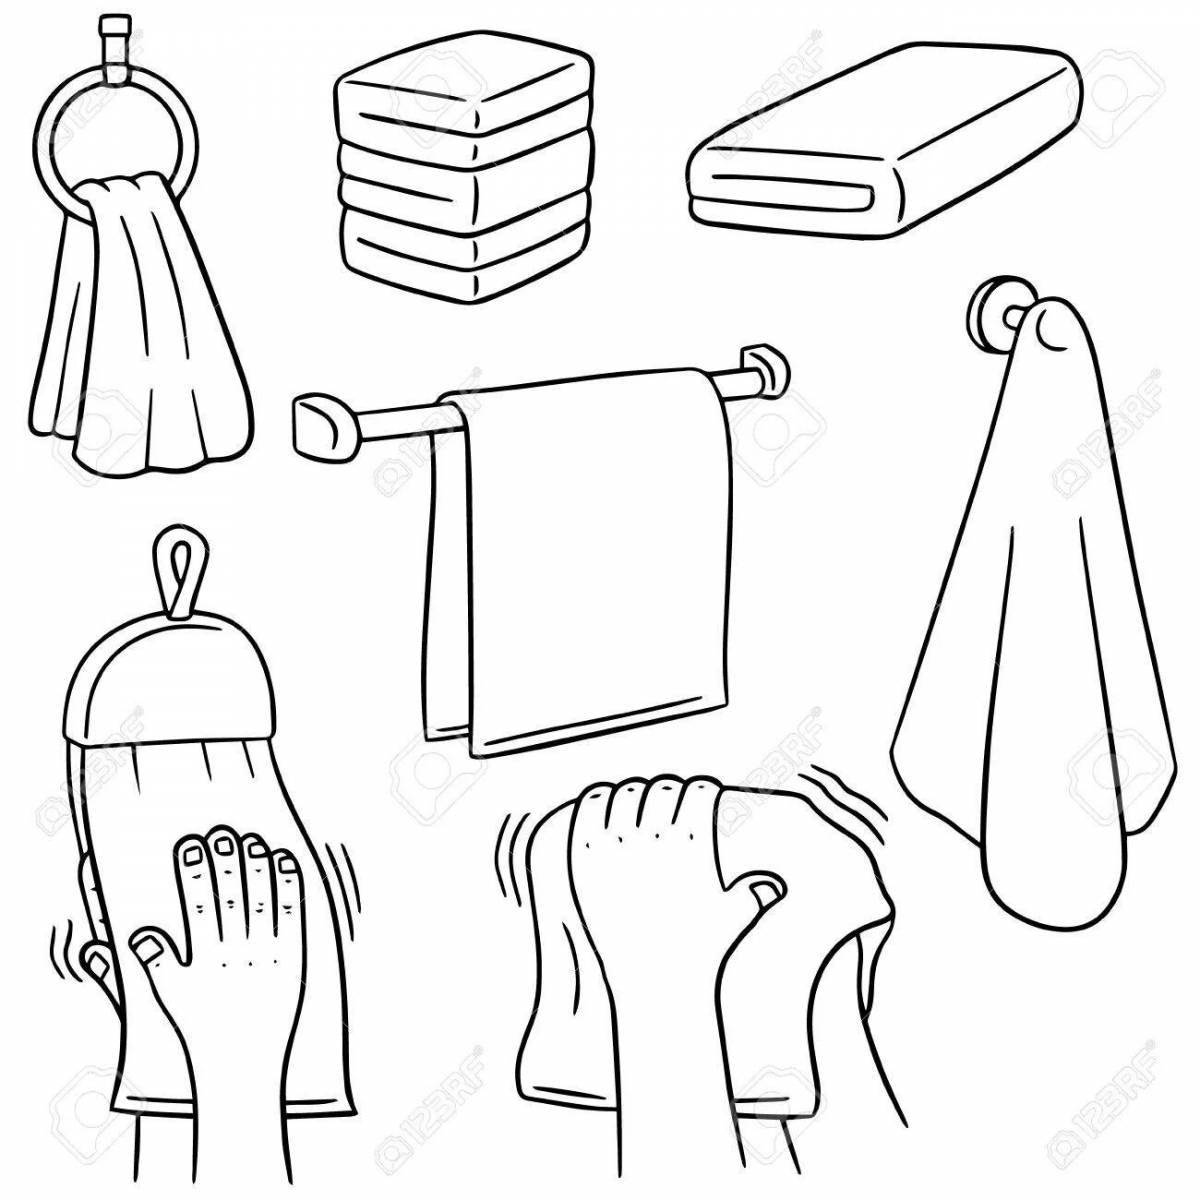 Fun coloring of towels for children